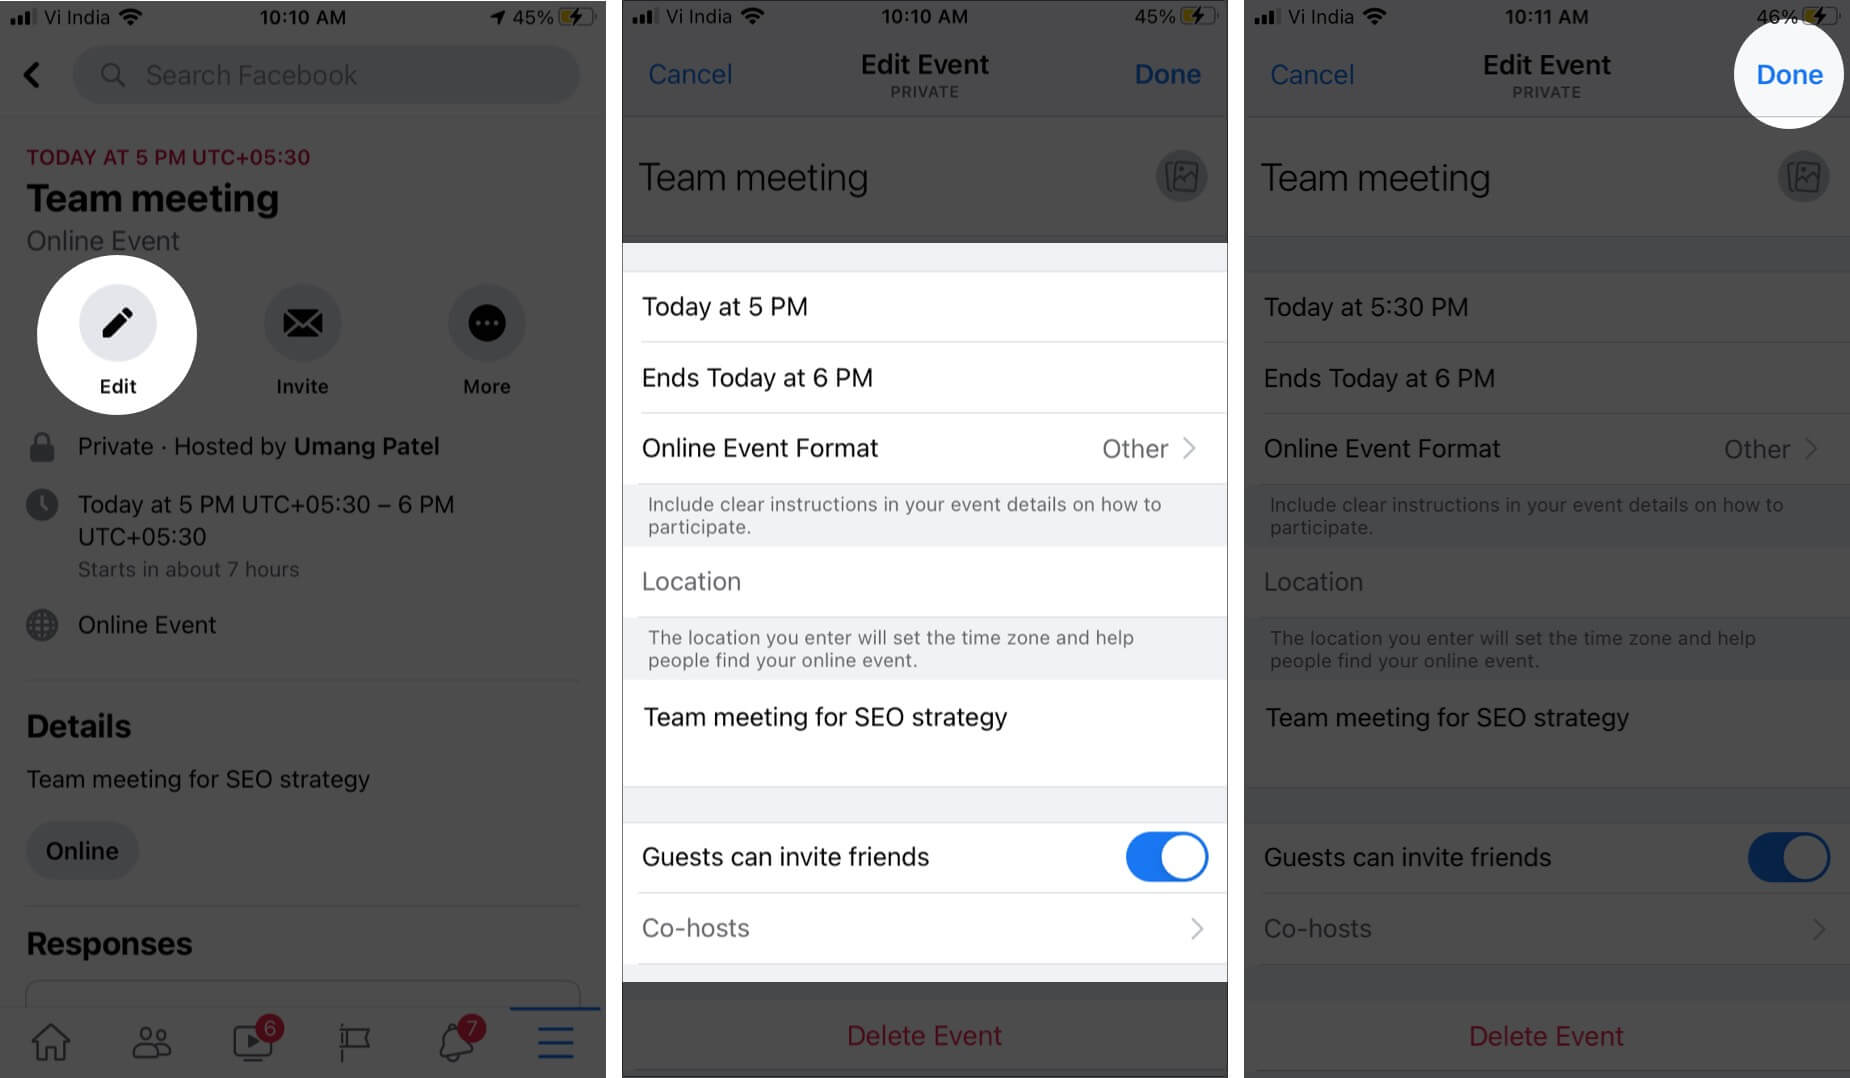 Edit Existing Event in Facebook for iPhone